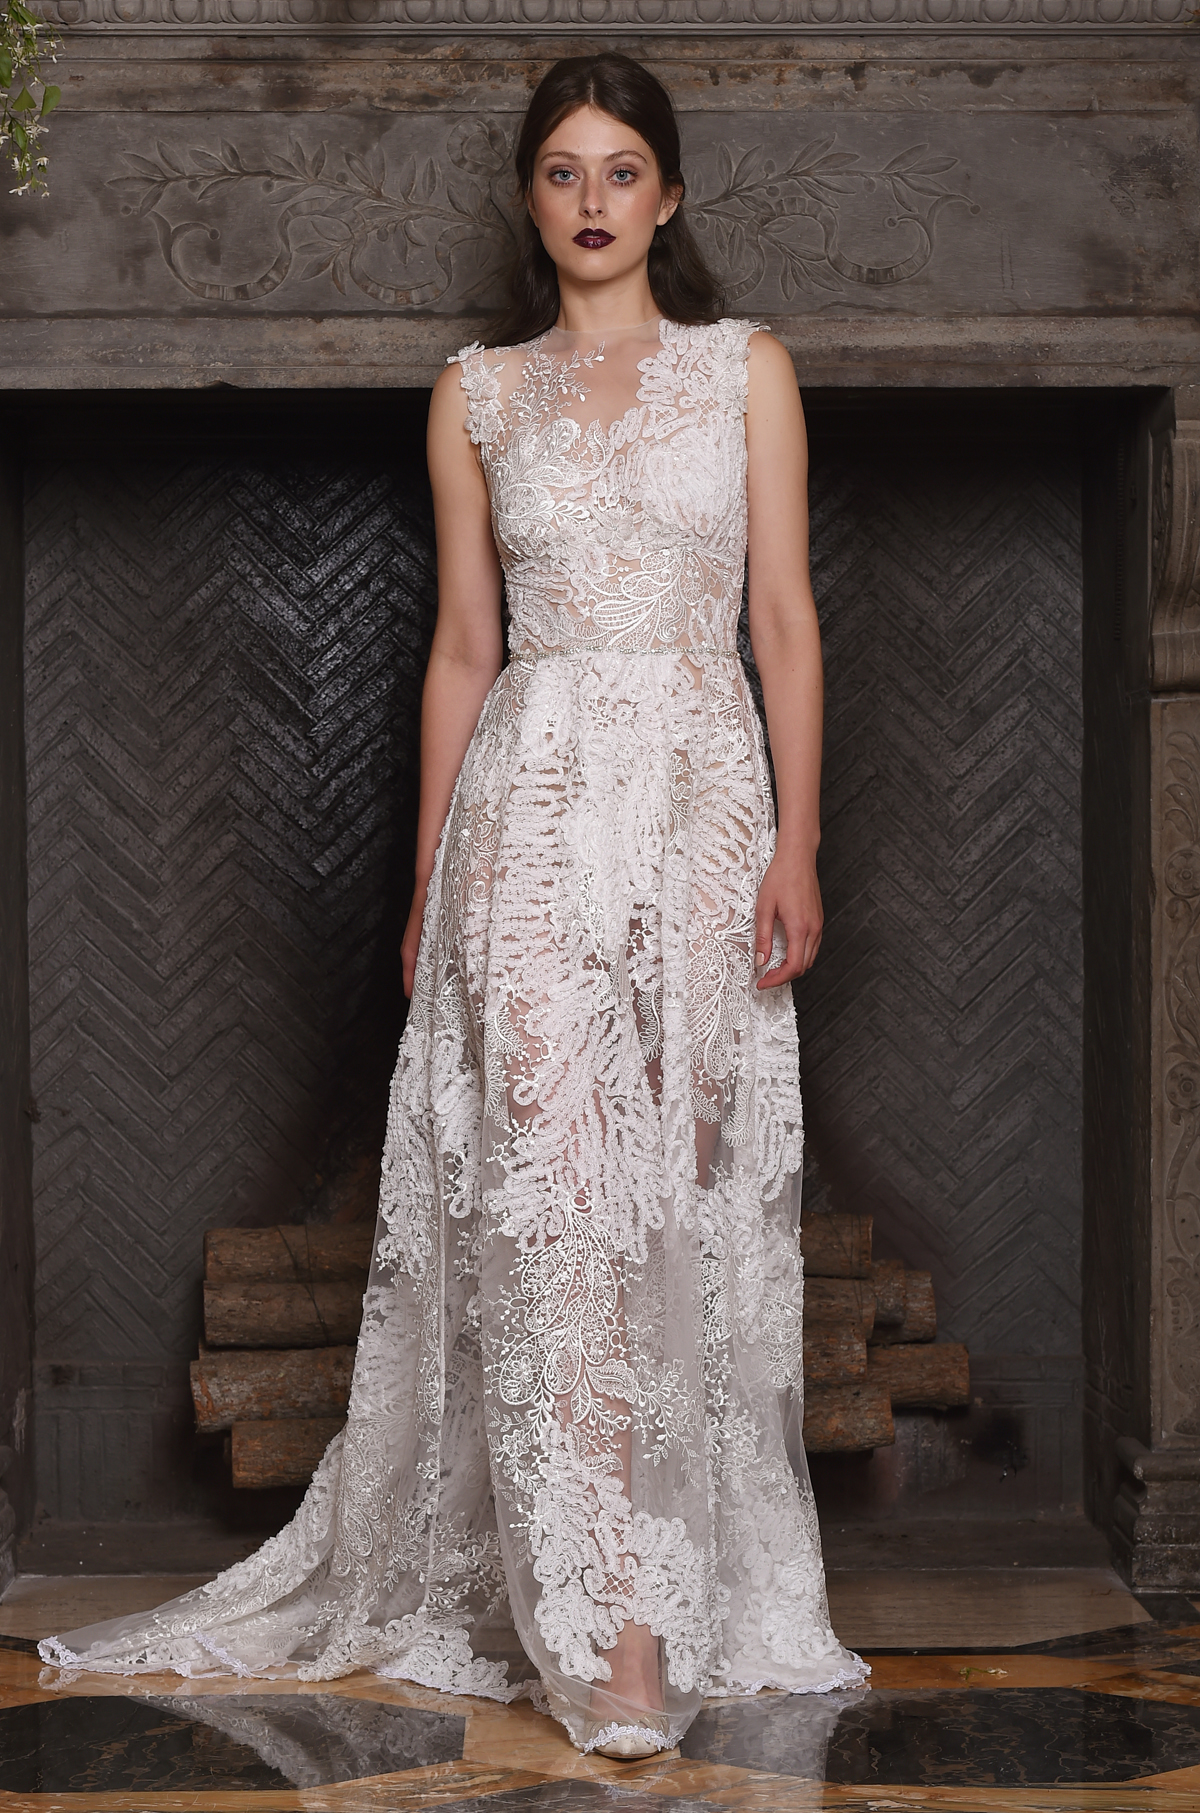 The Snow gown, from Claire Pettibone's 'The Four Seasons' bridal couture collection for 2017.